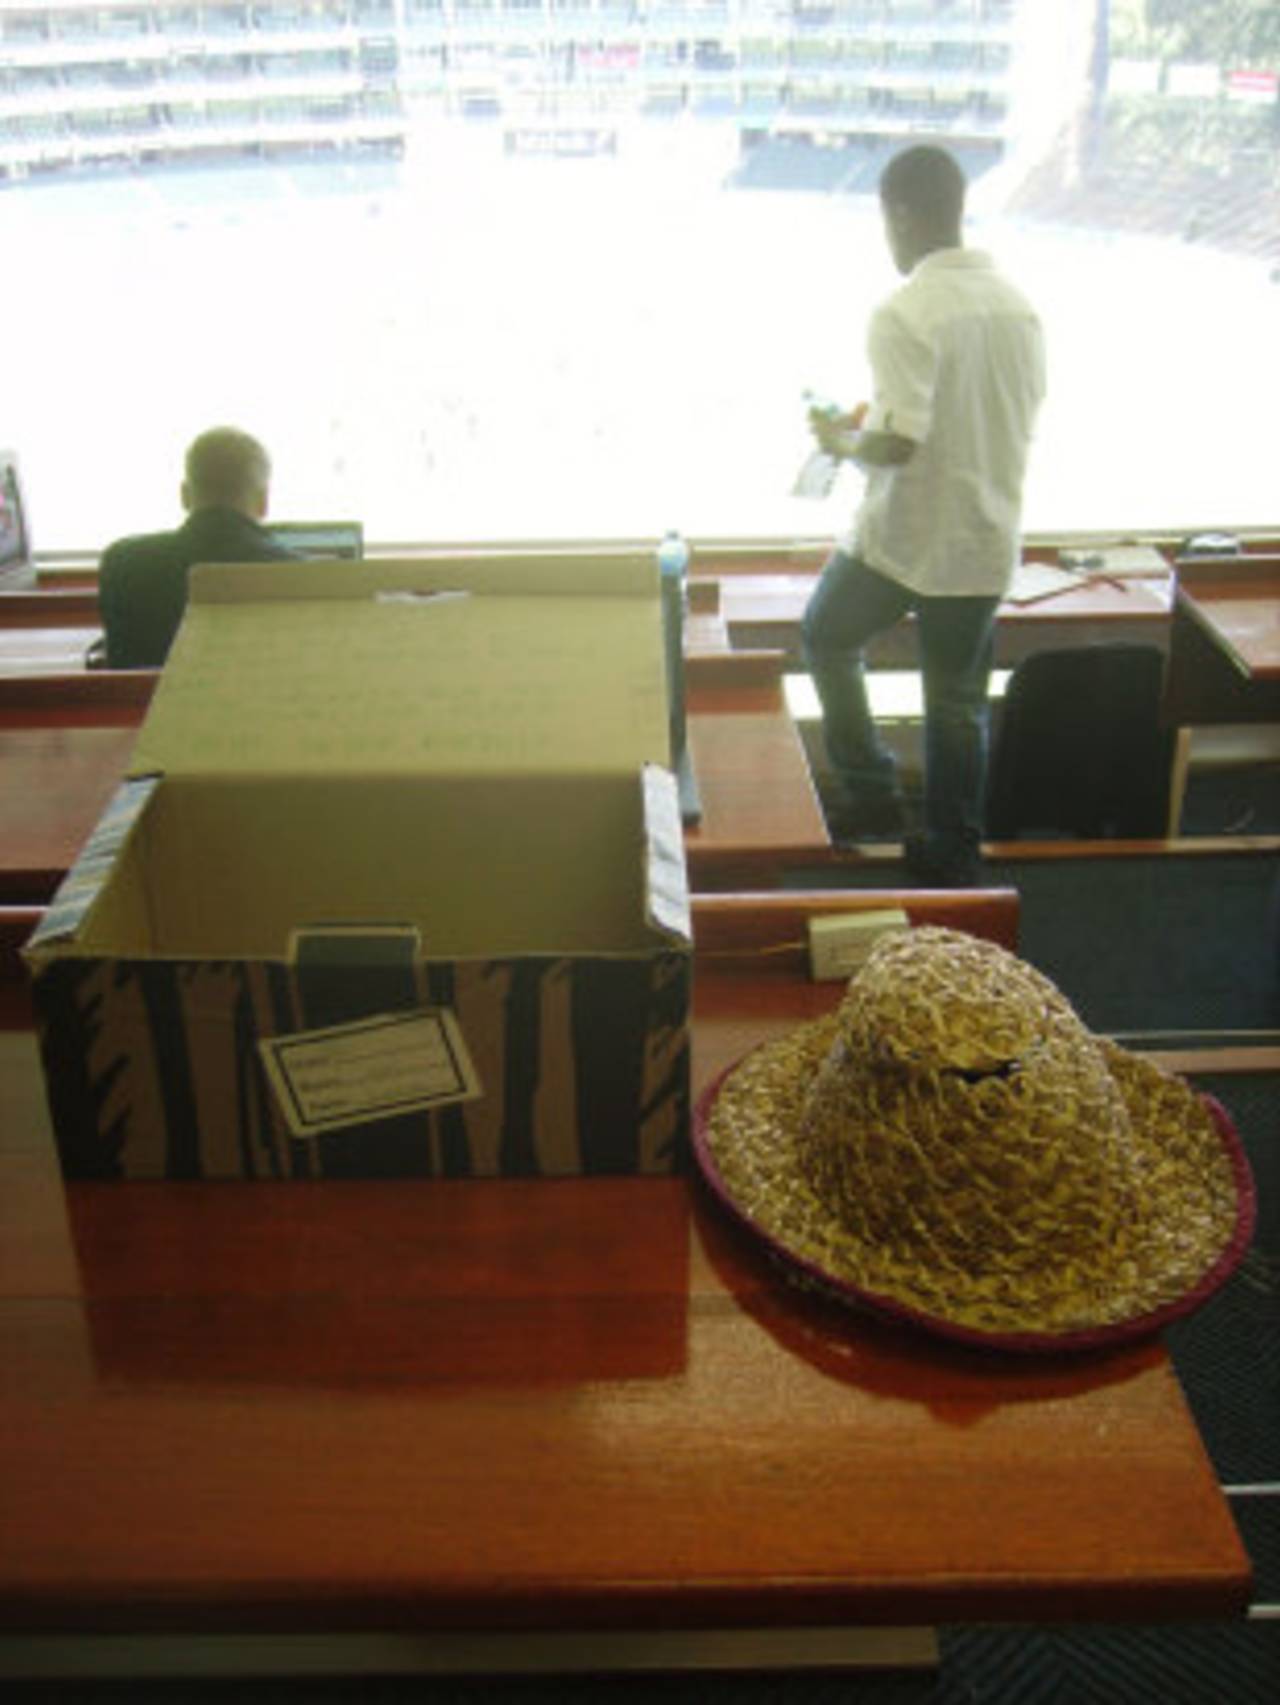 Peter Roebuck's hat sits on a desk in the press box, South Africa v Australia, 2nd Test, Johannesburg, 1st day, November 17, 2011